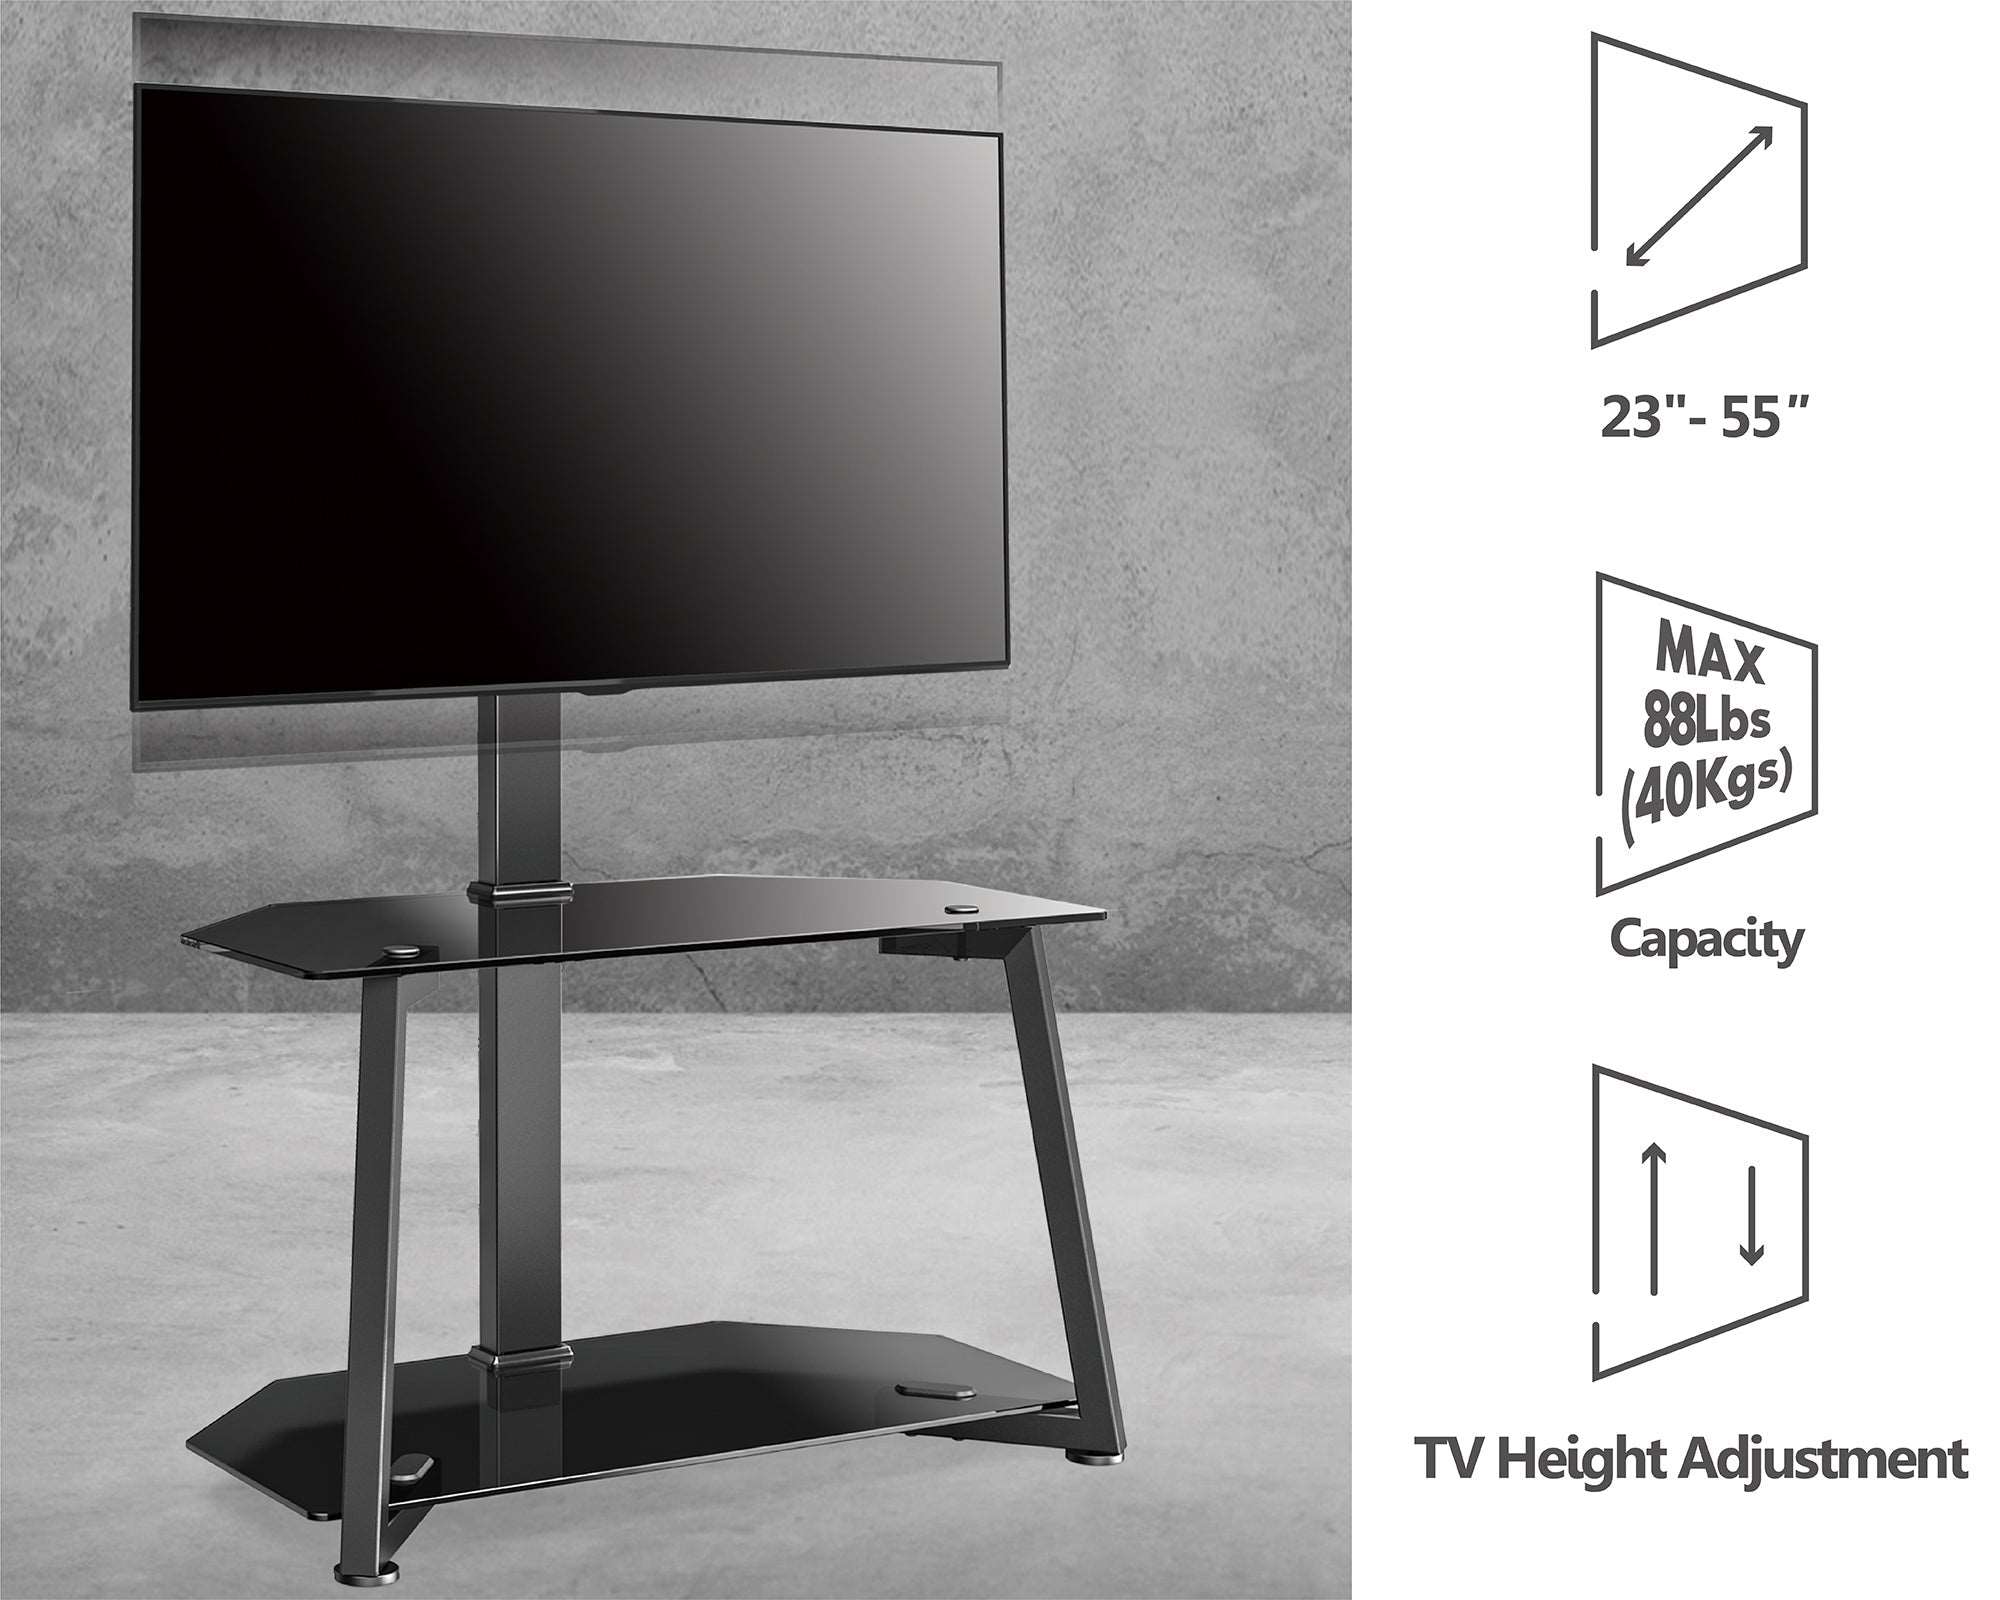 2-Tiers TV Stand/Base for 23-55 Inch TVs